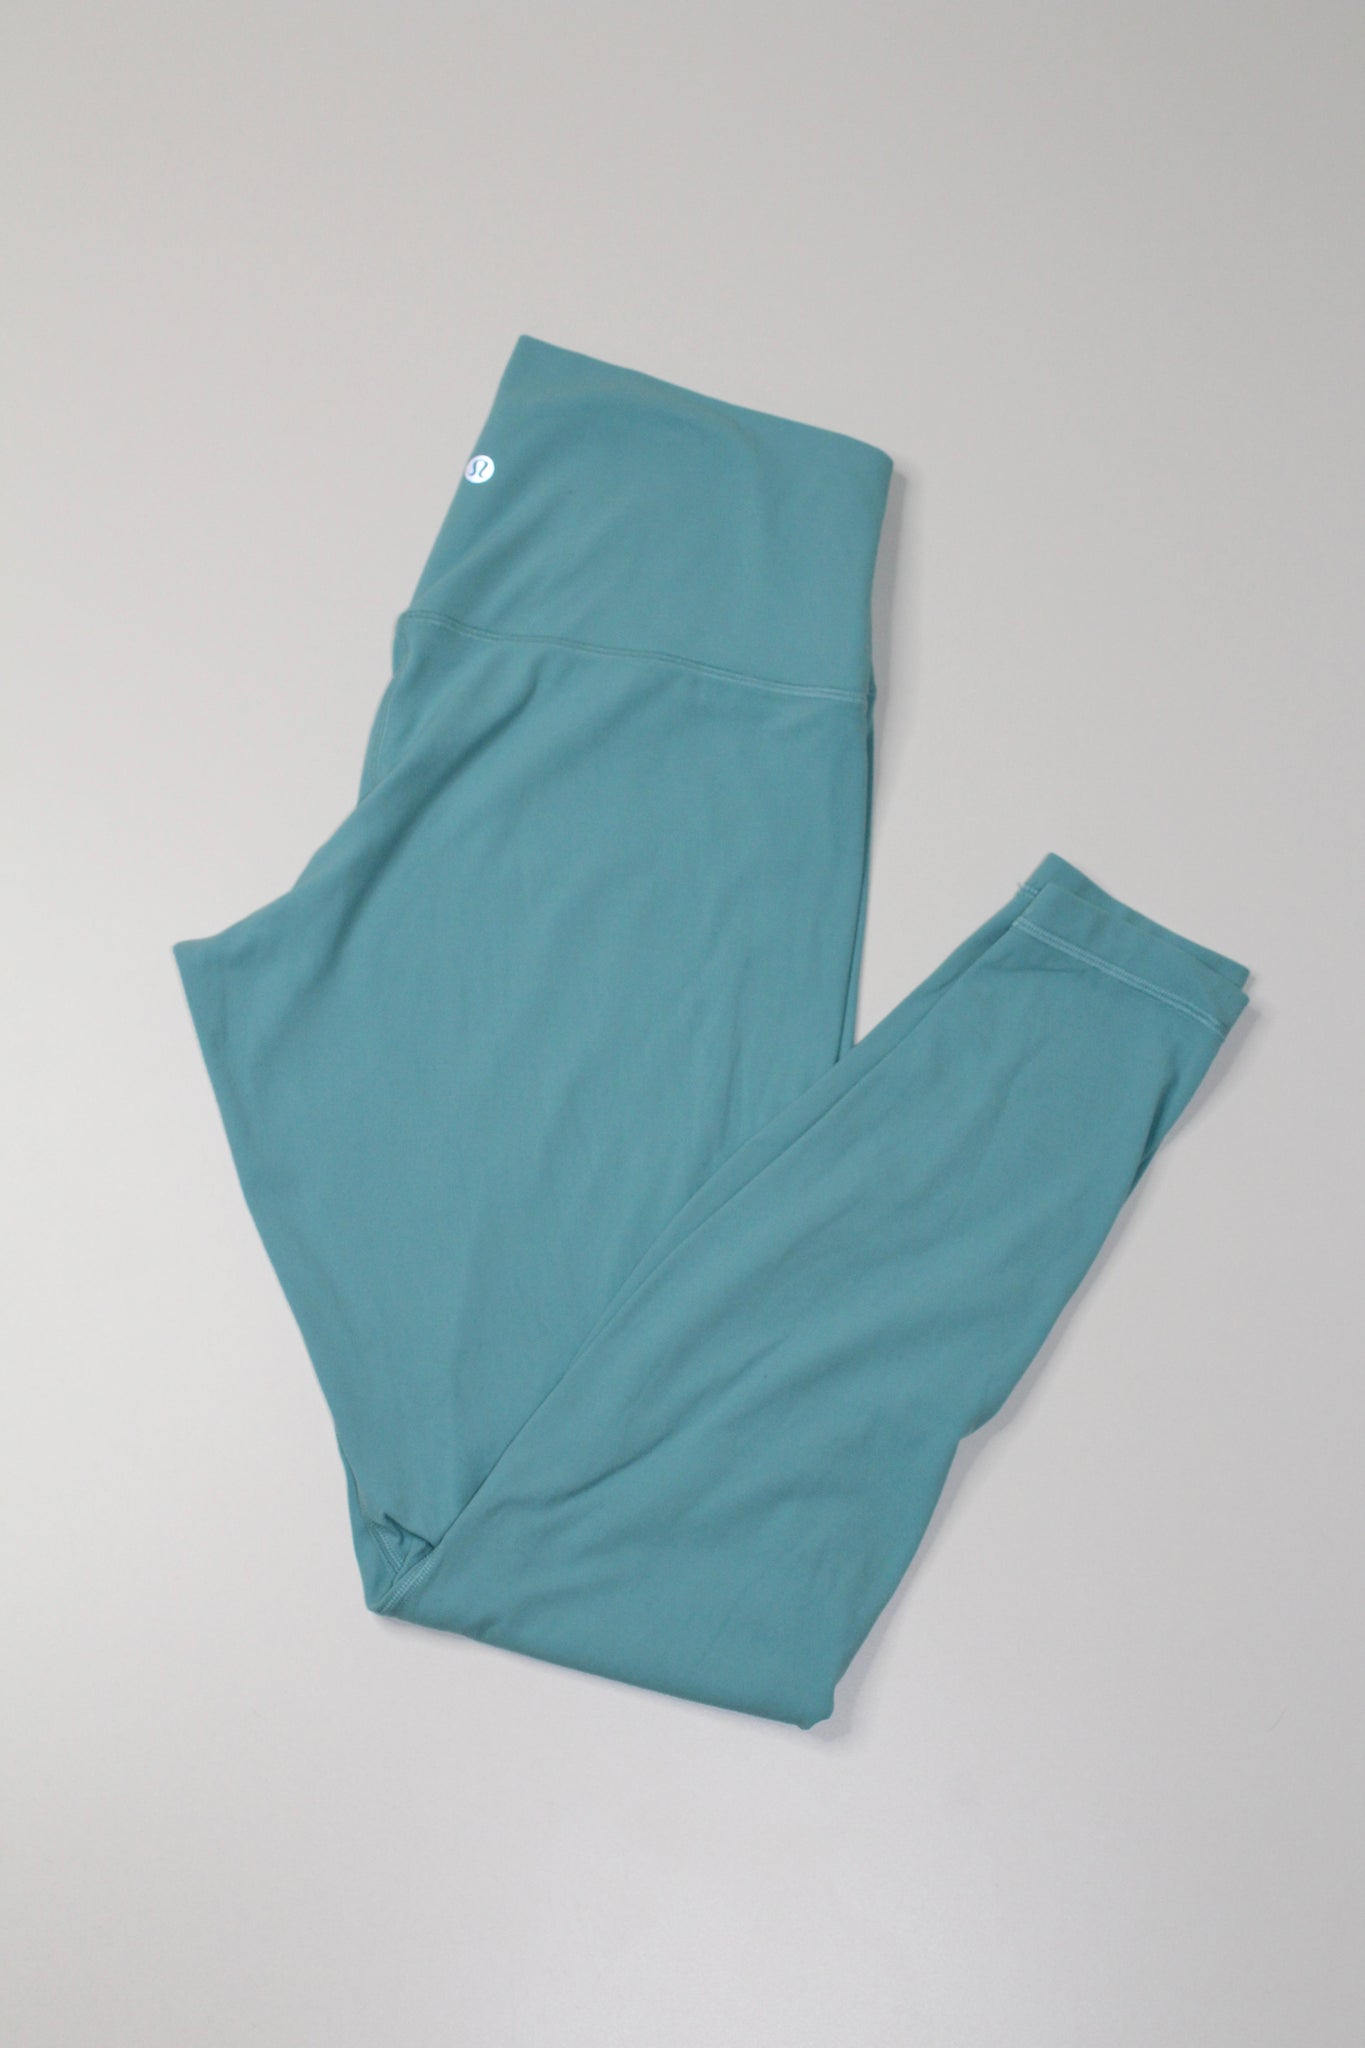 Lululemon align pant, size 12 (28”) (price reduced: was $58)